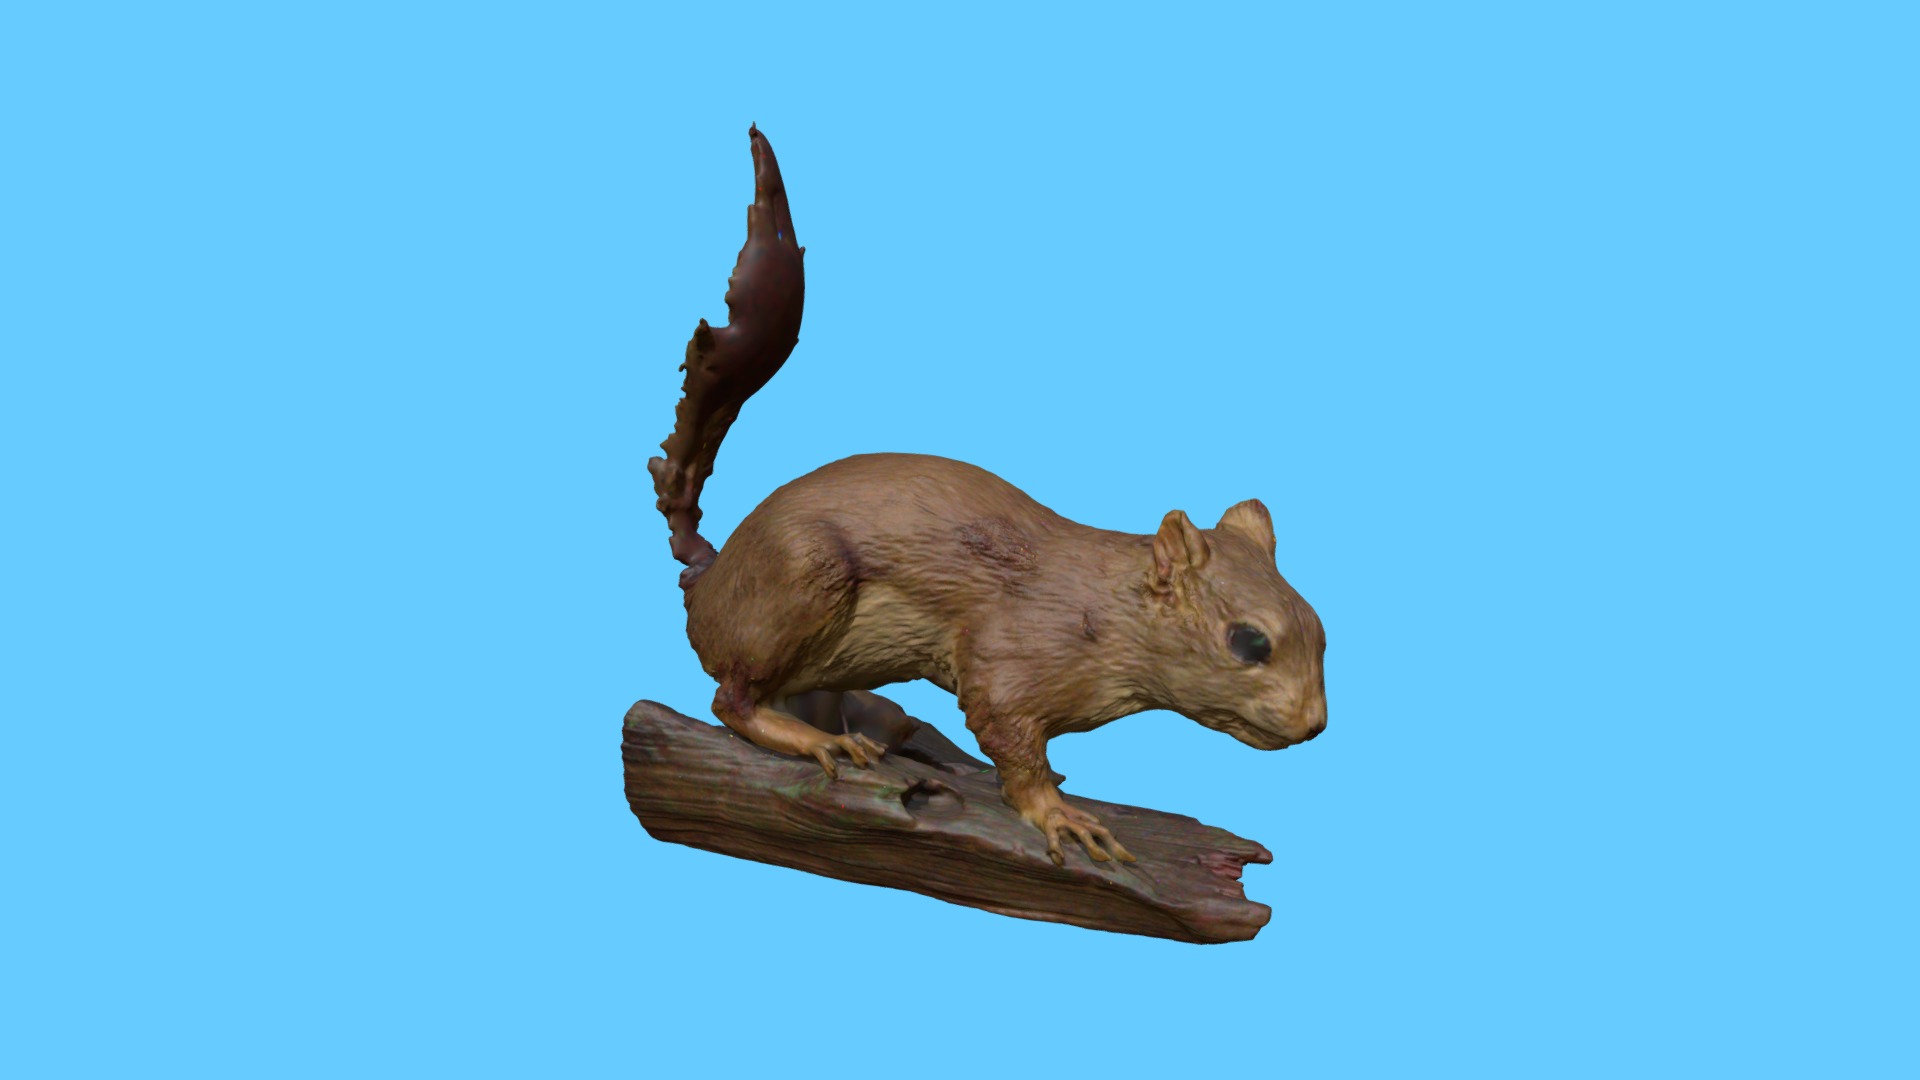 3D model American Red Squirrel – WIP - This is a 3D model of the American Red Squirrel - WIP. The 3D model is about a squirrel on a branch.